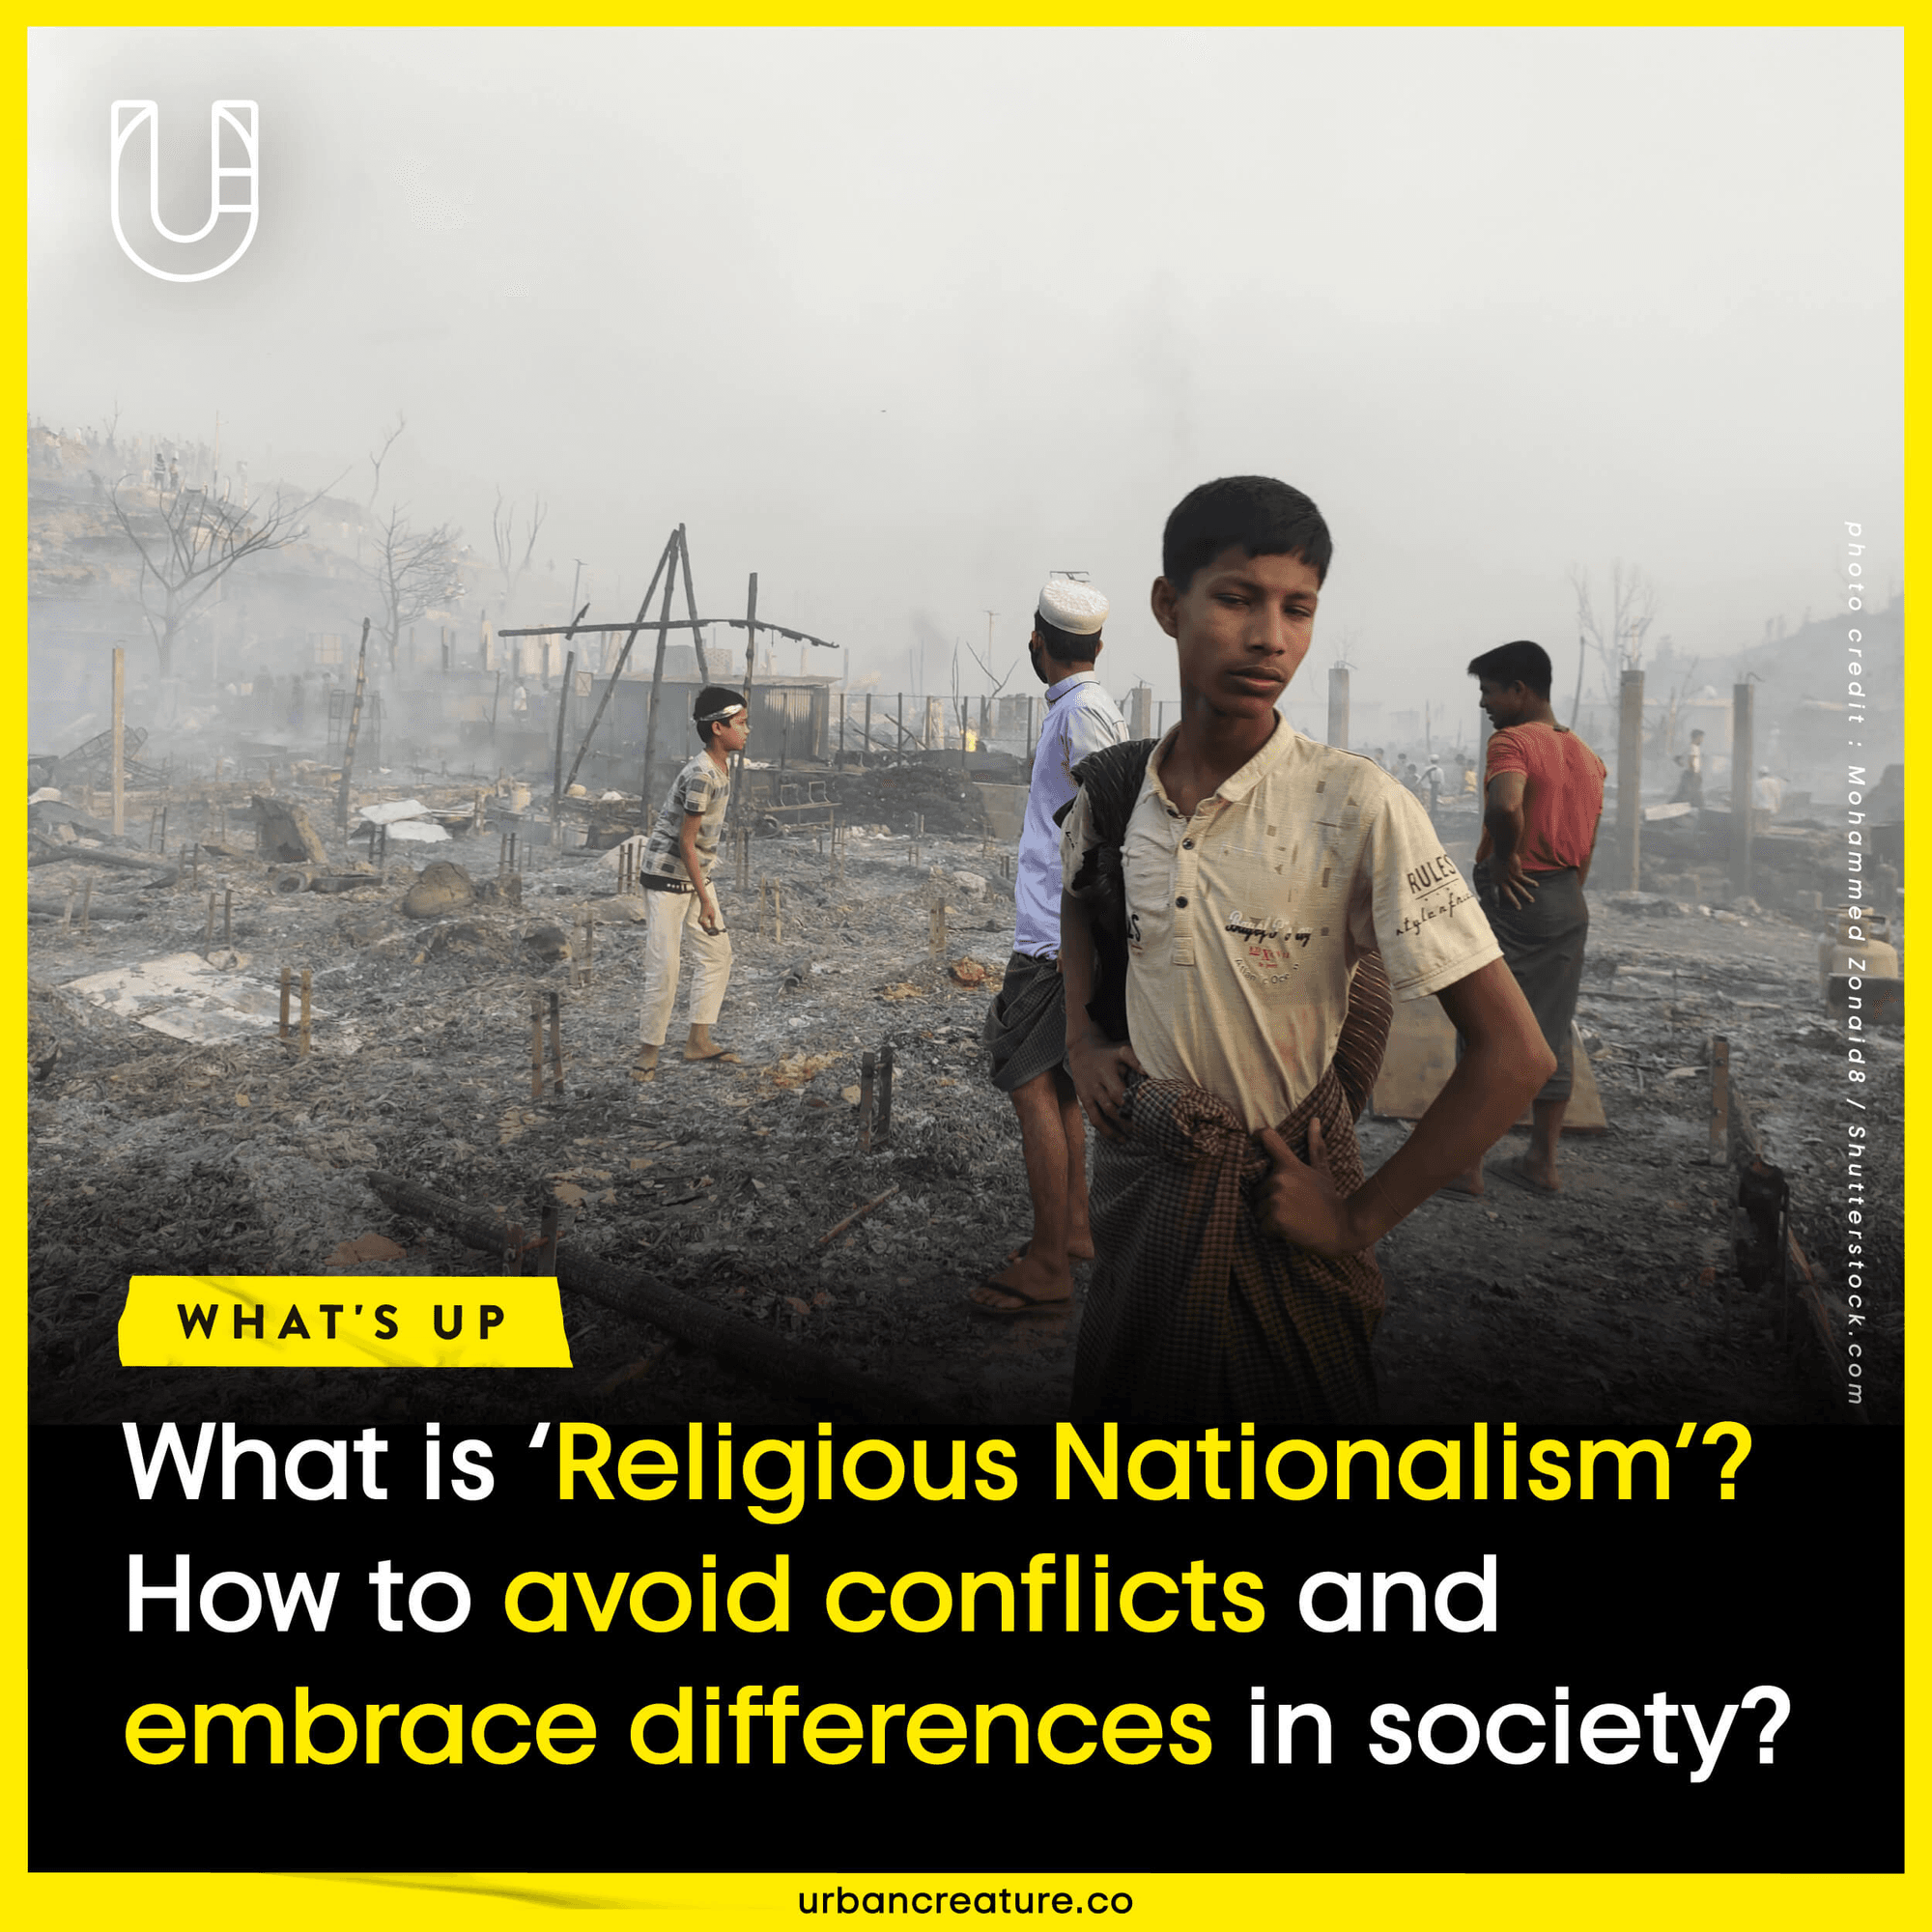 What is ‘Religious Nationalism’? How to avoid conflicts and embrace differences in society?